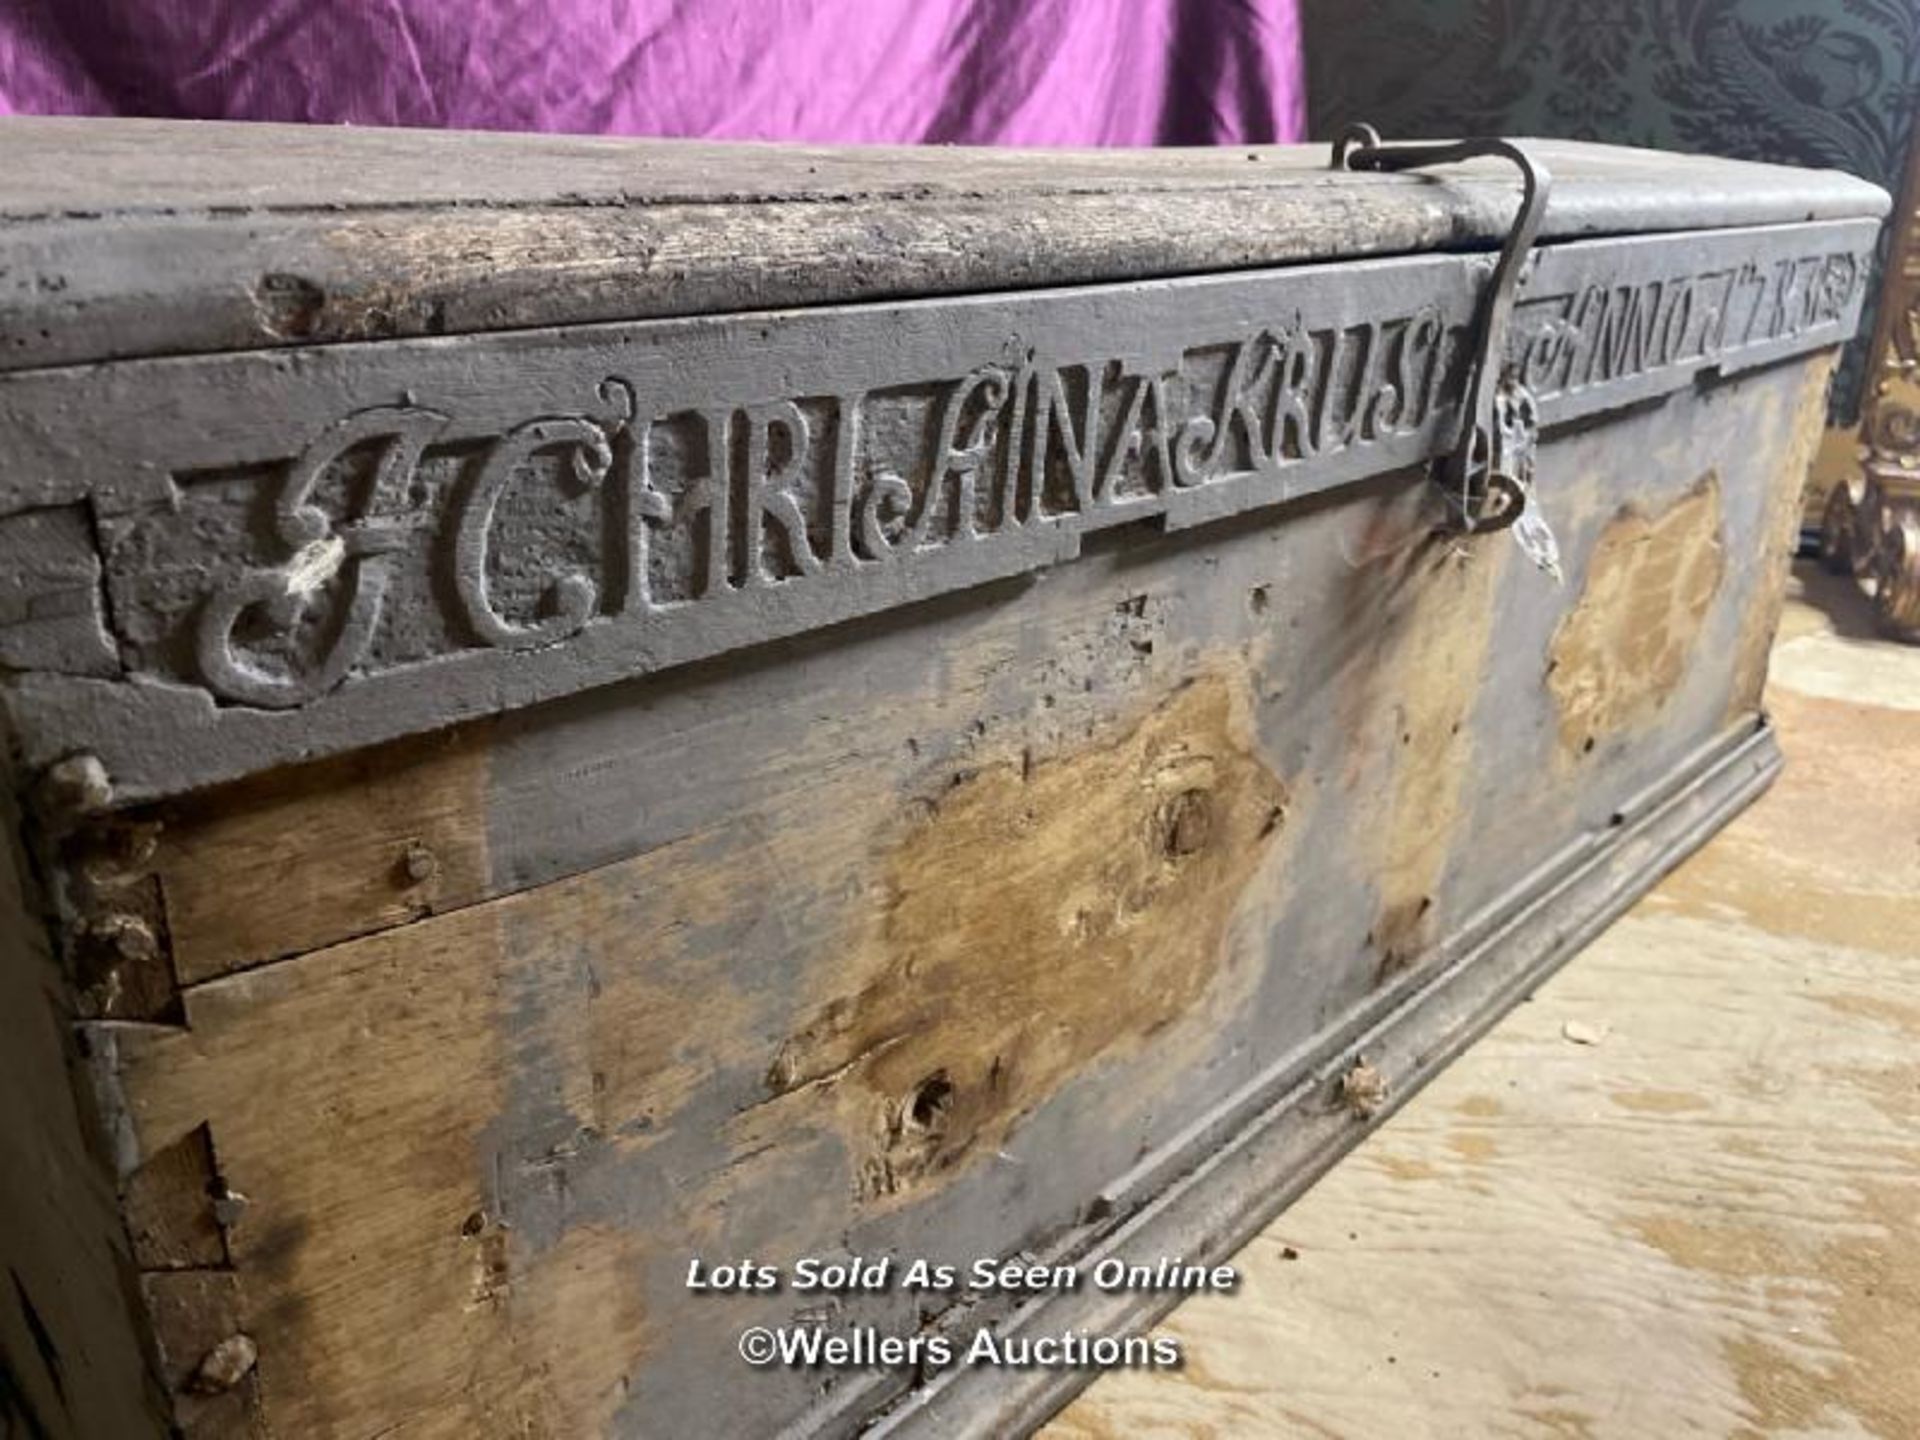 1785 CONTINENTAL MARRIAGE CHEST, IN NEED OF RESTORATION, 134 X 61 X 51CM - Image 2 of 3